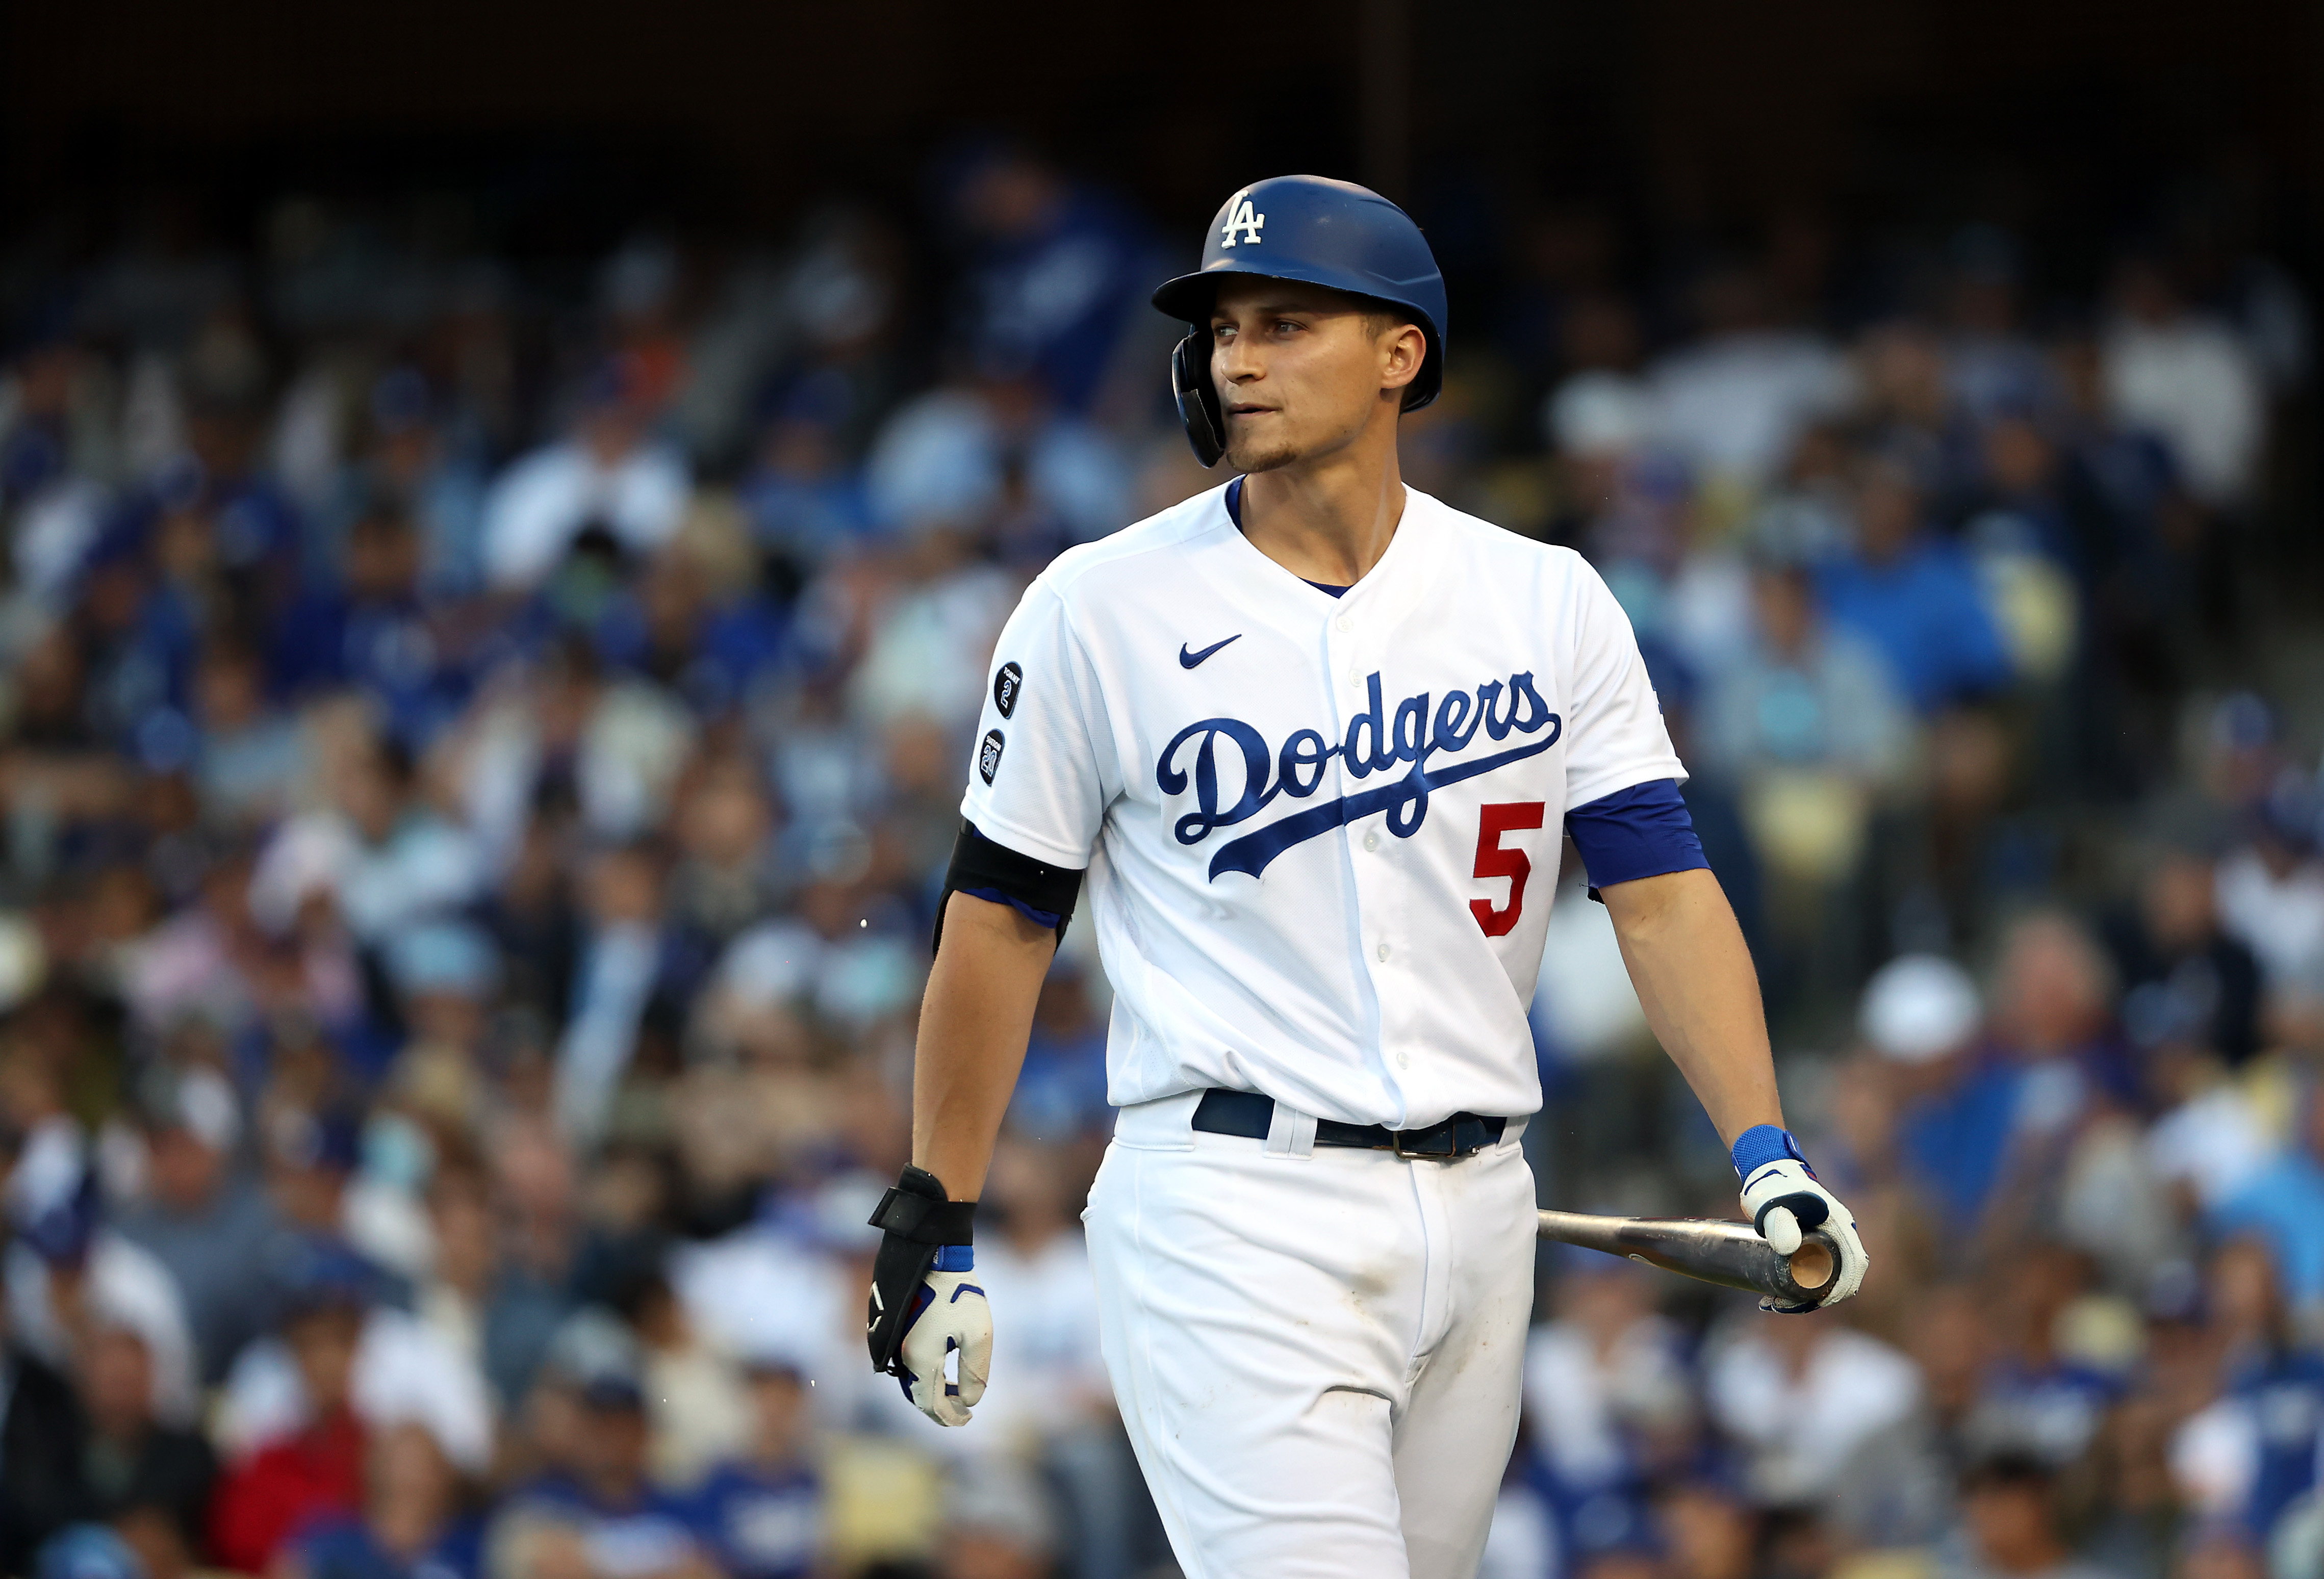 Corey Seager vs. Kyle Seager - Backstage Dodgers Season 7 (2020